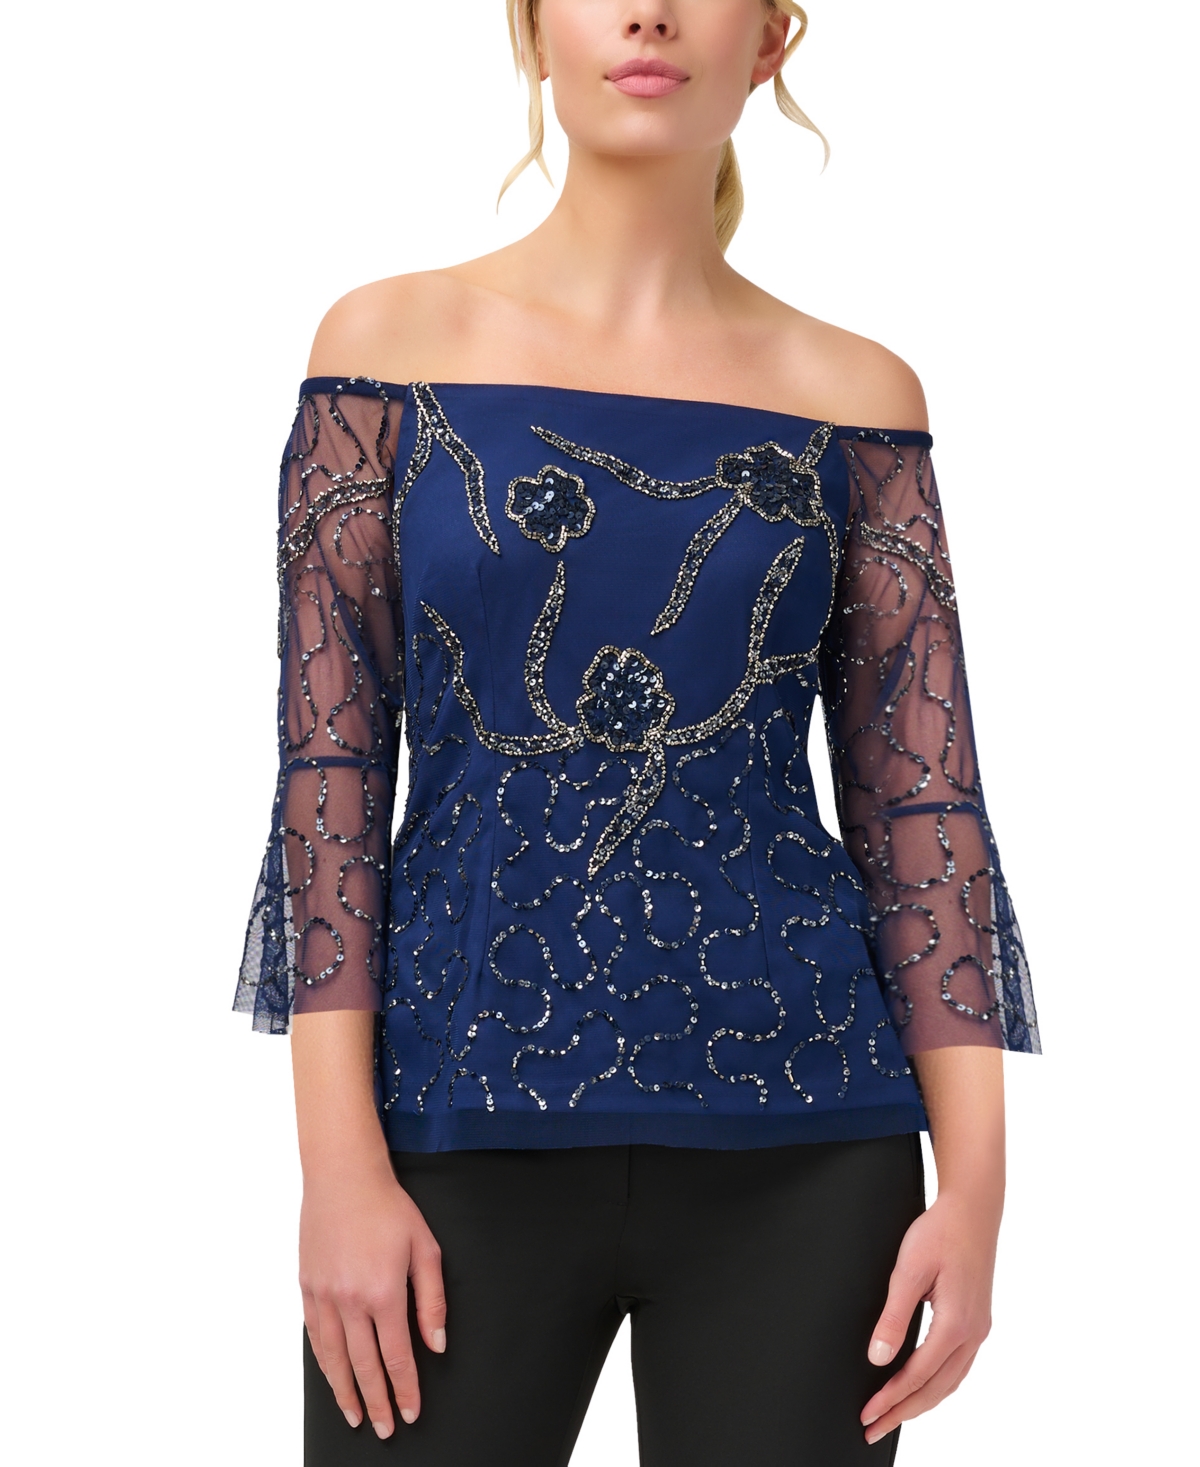  Adrianna Papell Women's Off-The-Shoulder Embellished Blouse